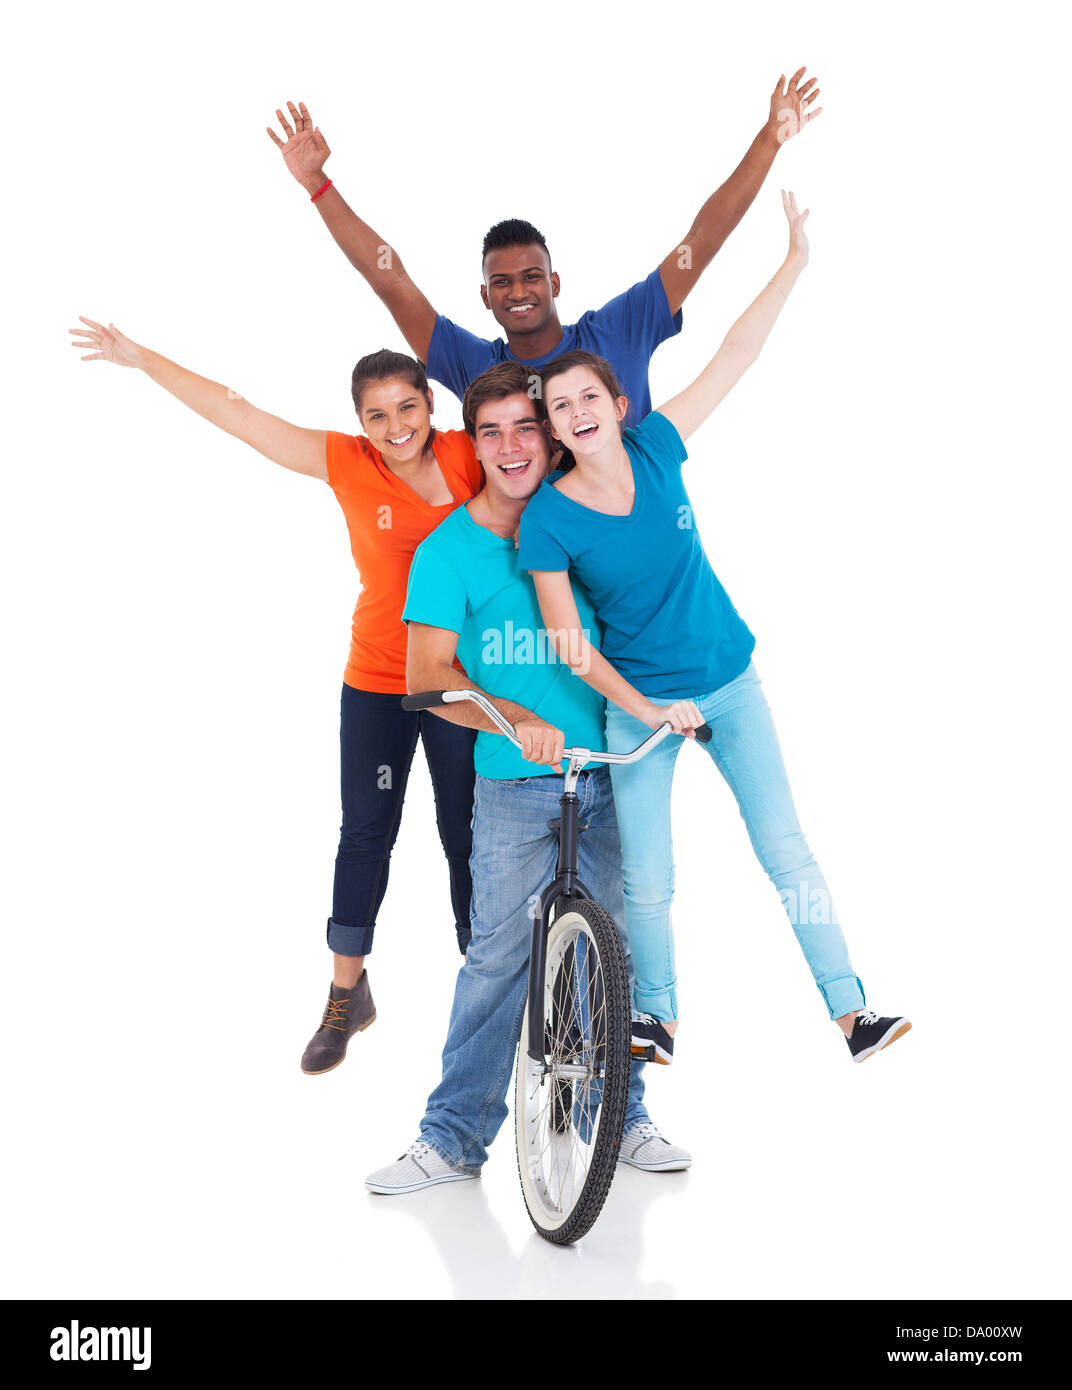 group of cheerful teenagers riding on bicycle isolated on white background Stock Photo